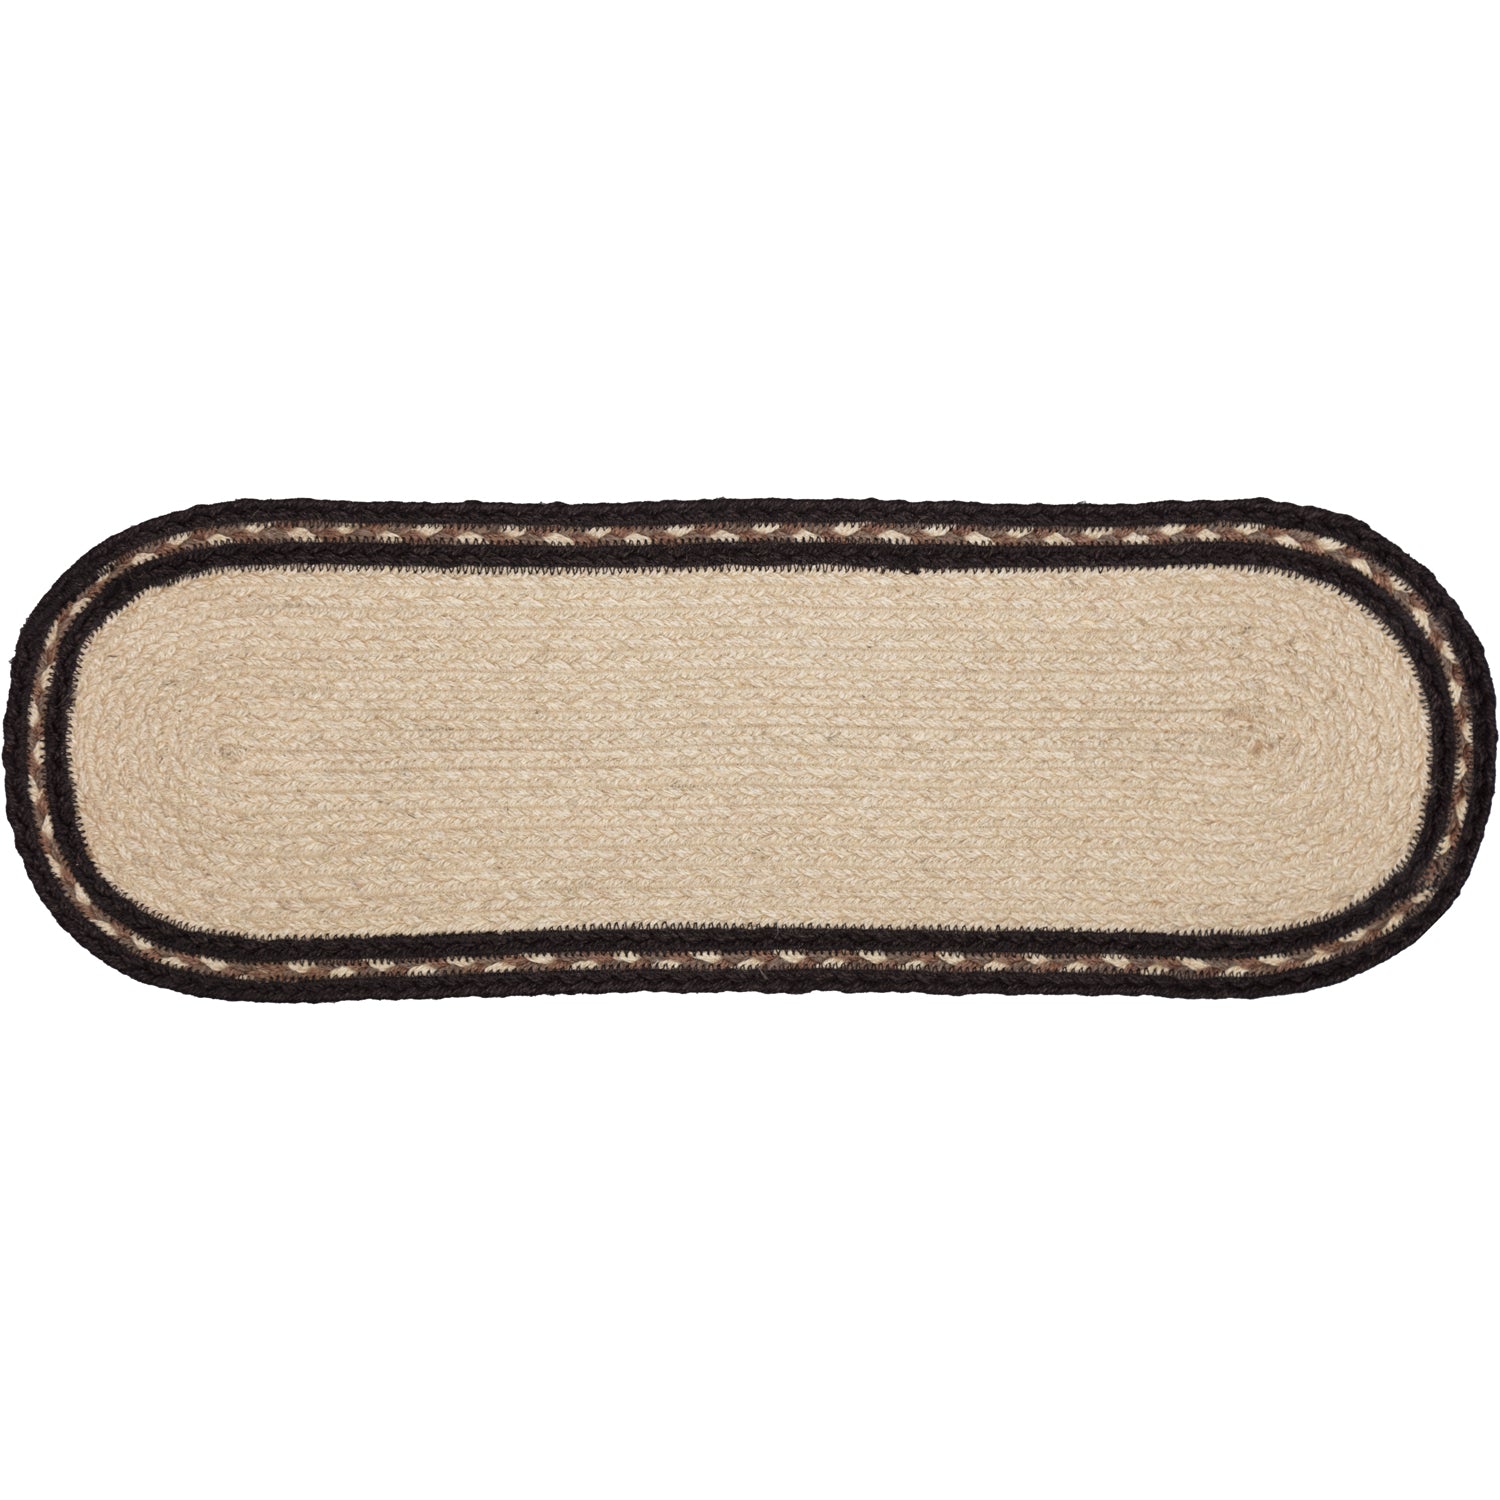 45735-Sawyer-Mill-Charcoal-Creme-Farmhouse-Jute-Oval-Runner-8x24-image-6